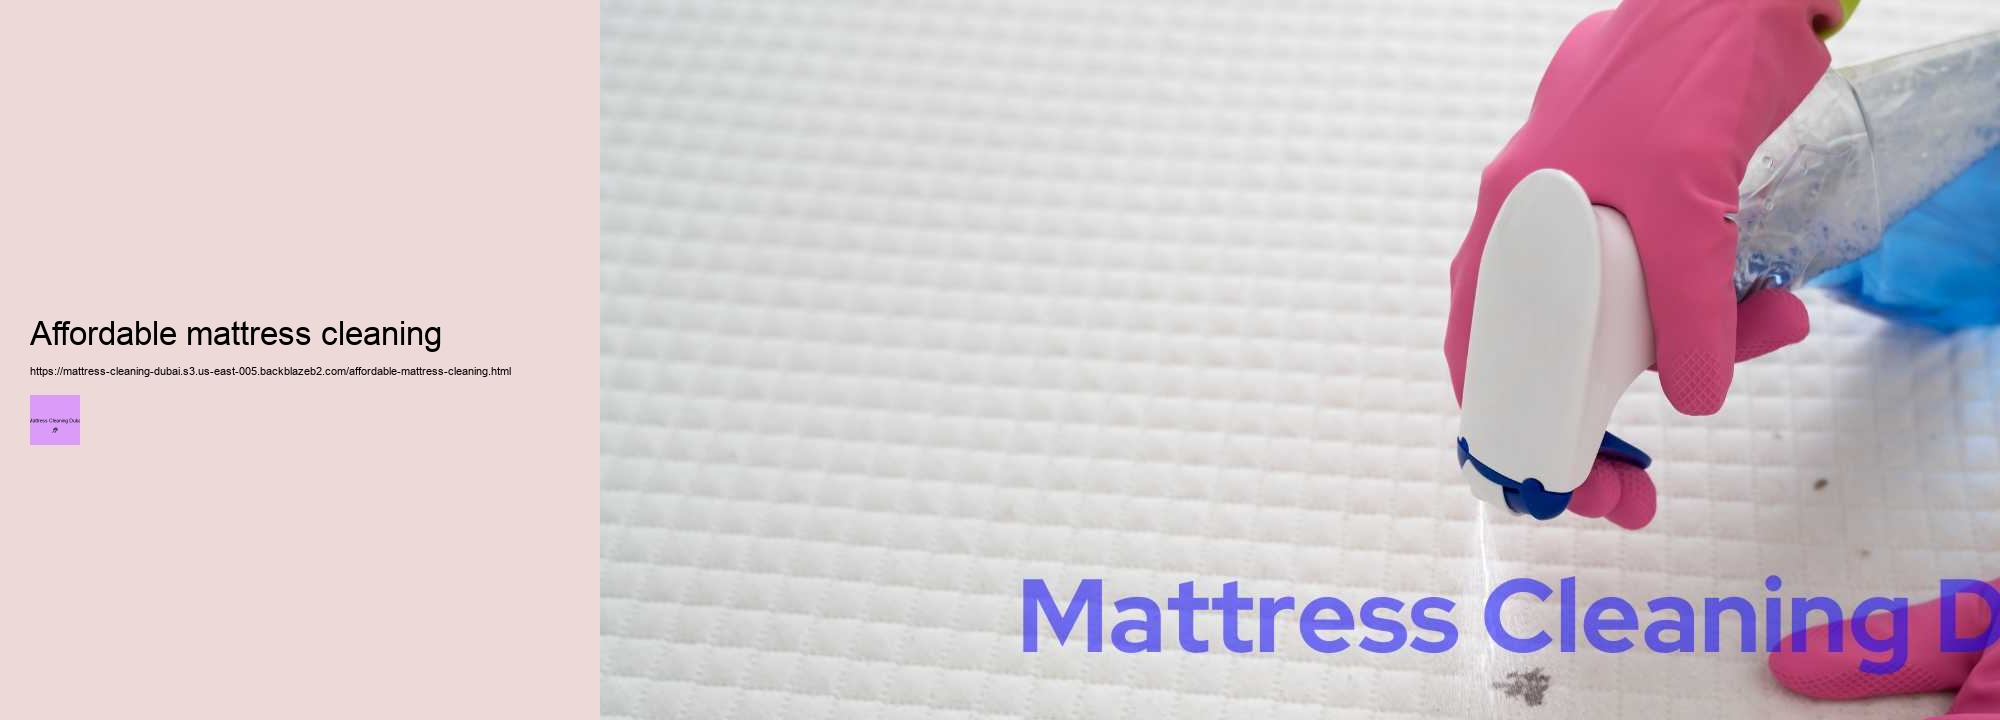 Affordable mattress cleaning